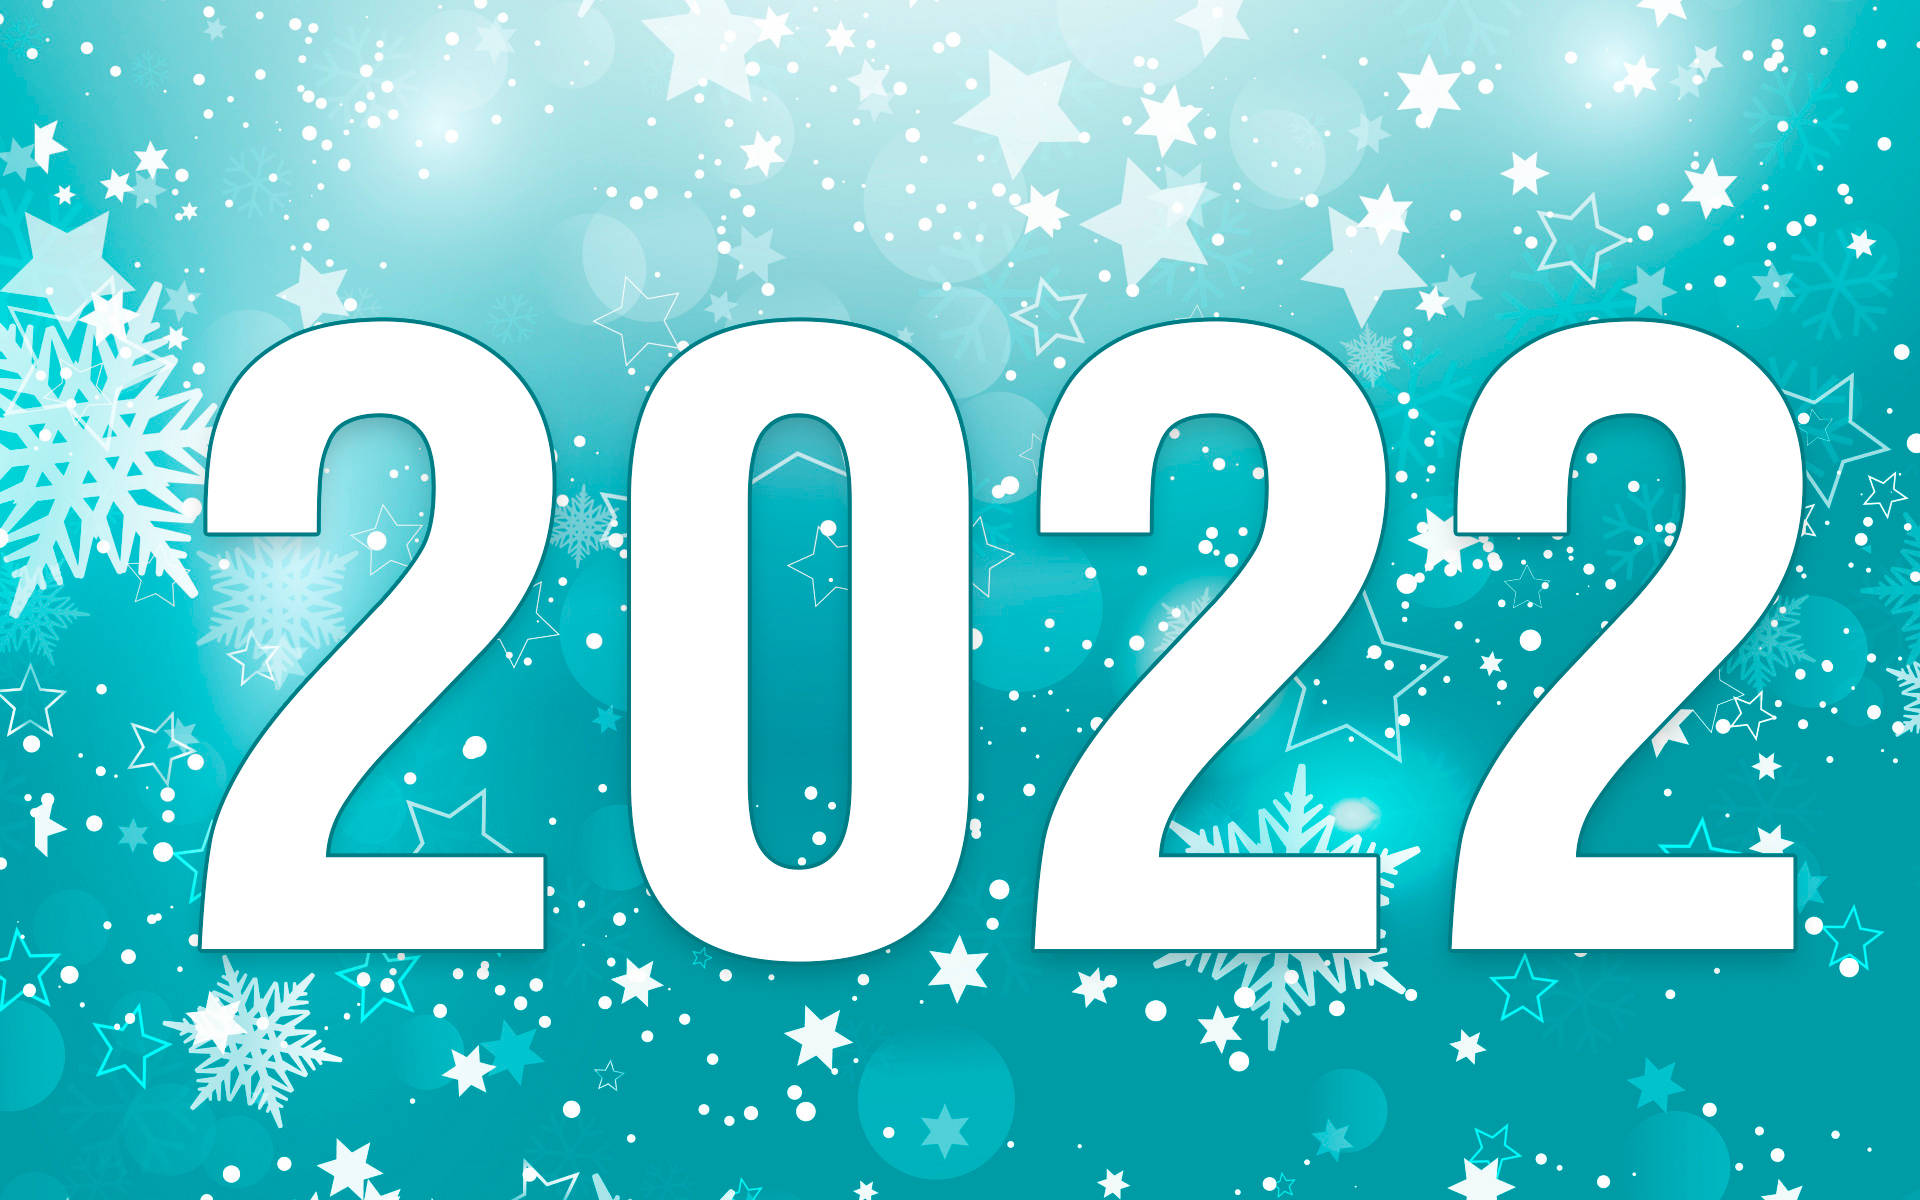 Happy New Year 2022 Teal Poster Wallpaper